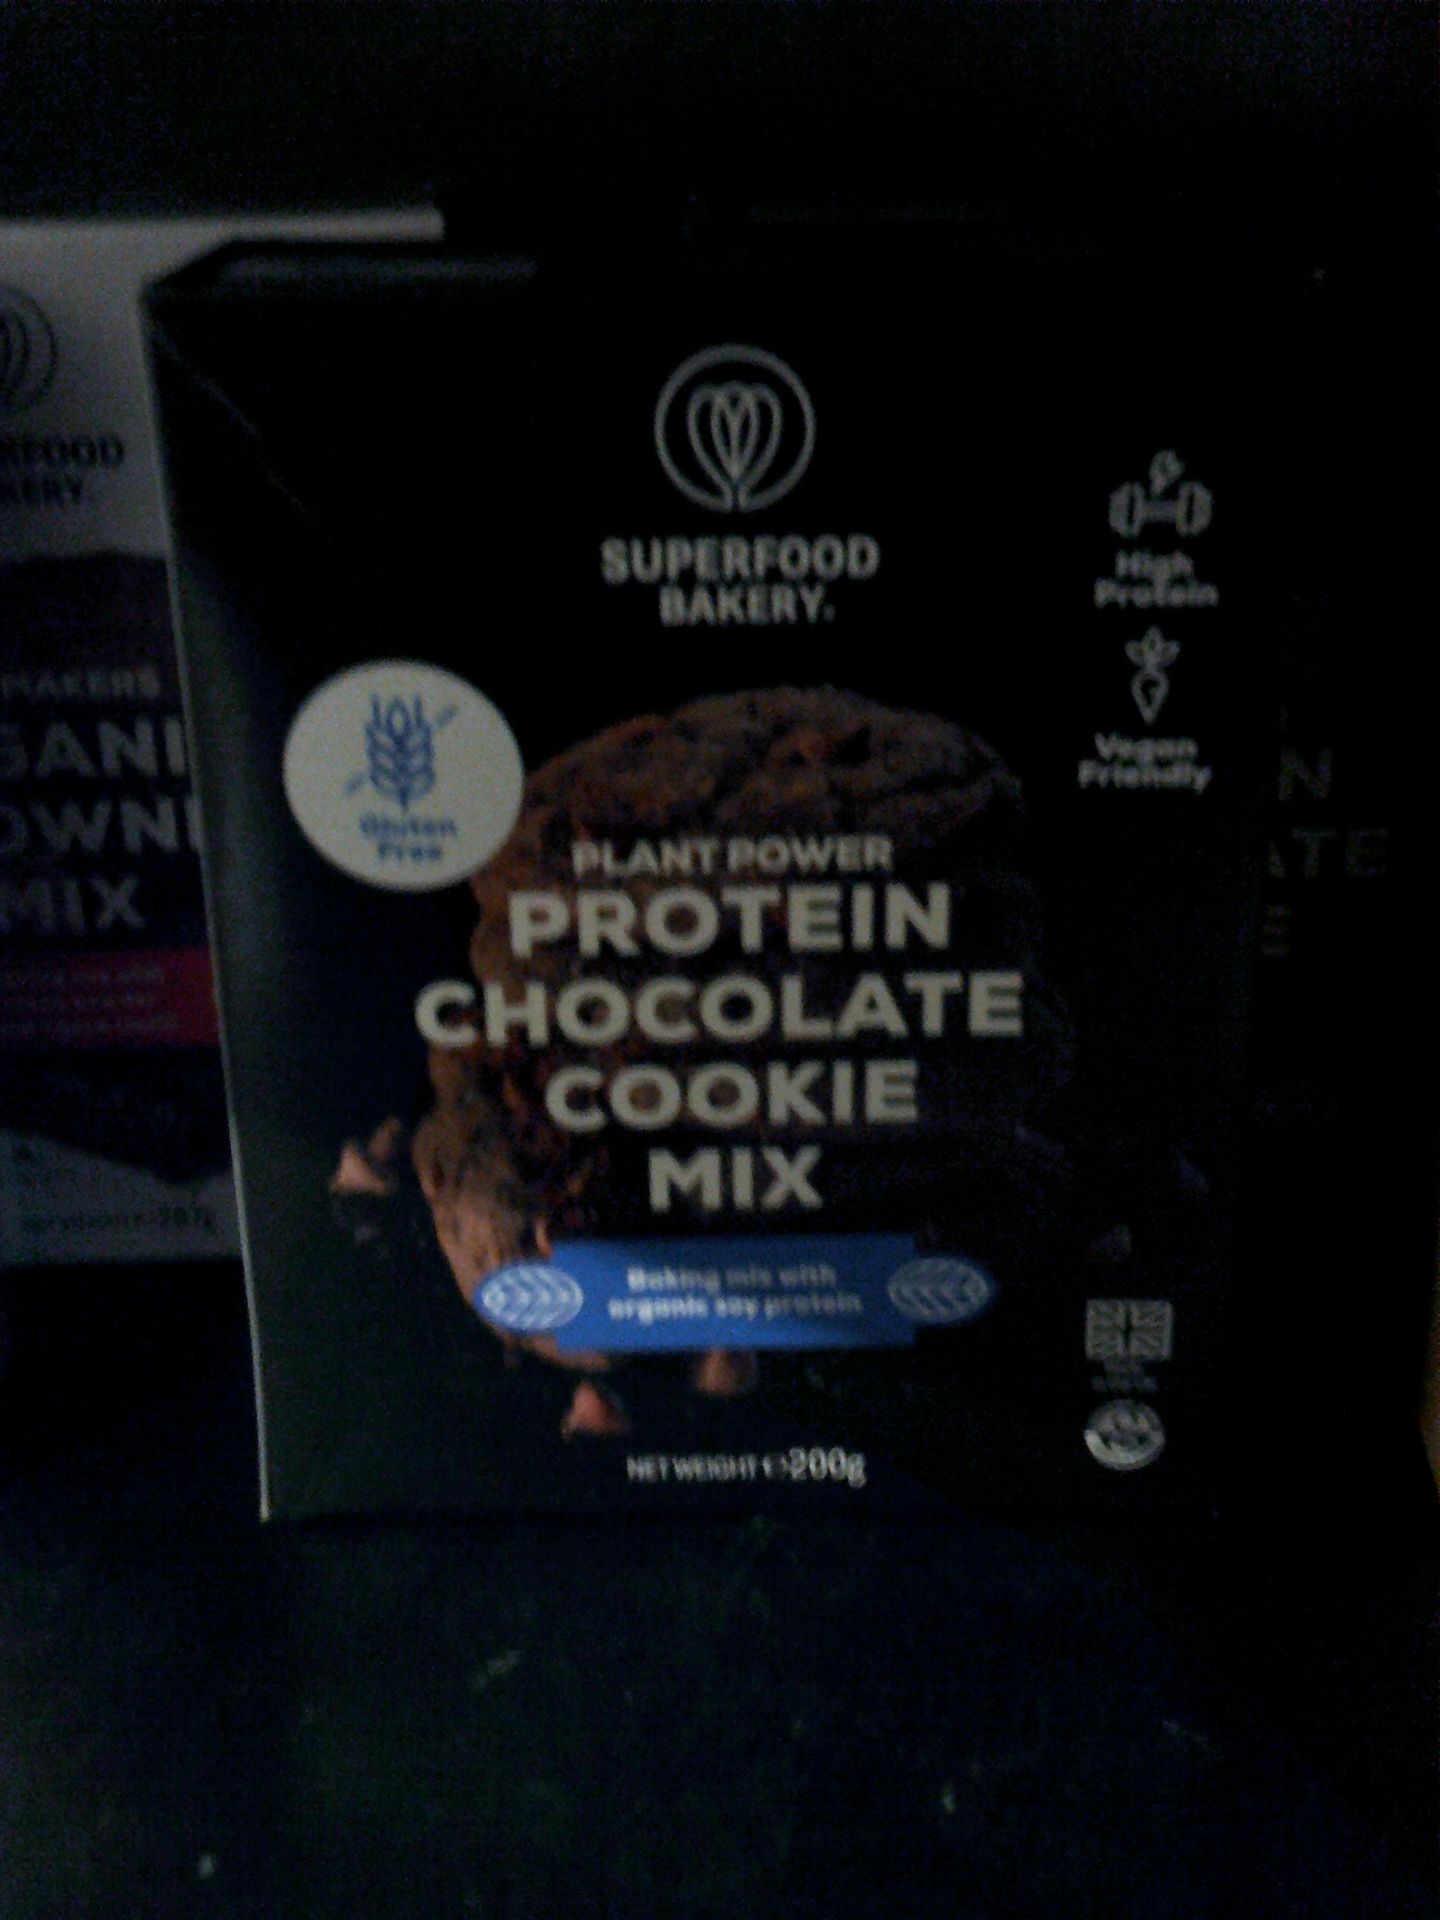 superfood bakery selection x 8 boxes. 2 x Pancake mix, 2 x brownie mix, 2 x choc cookie mix, 2 x - Image 4 of 5